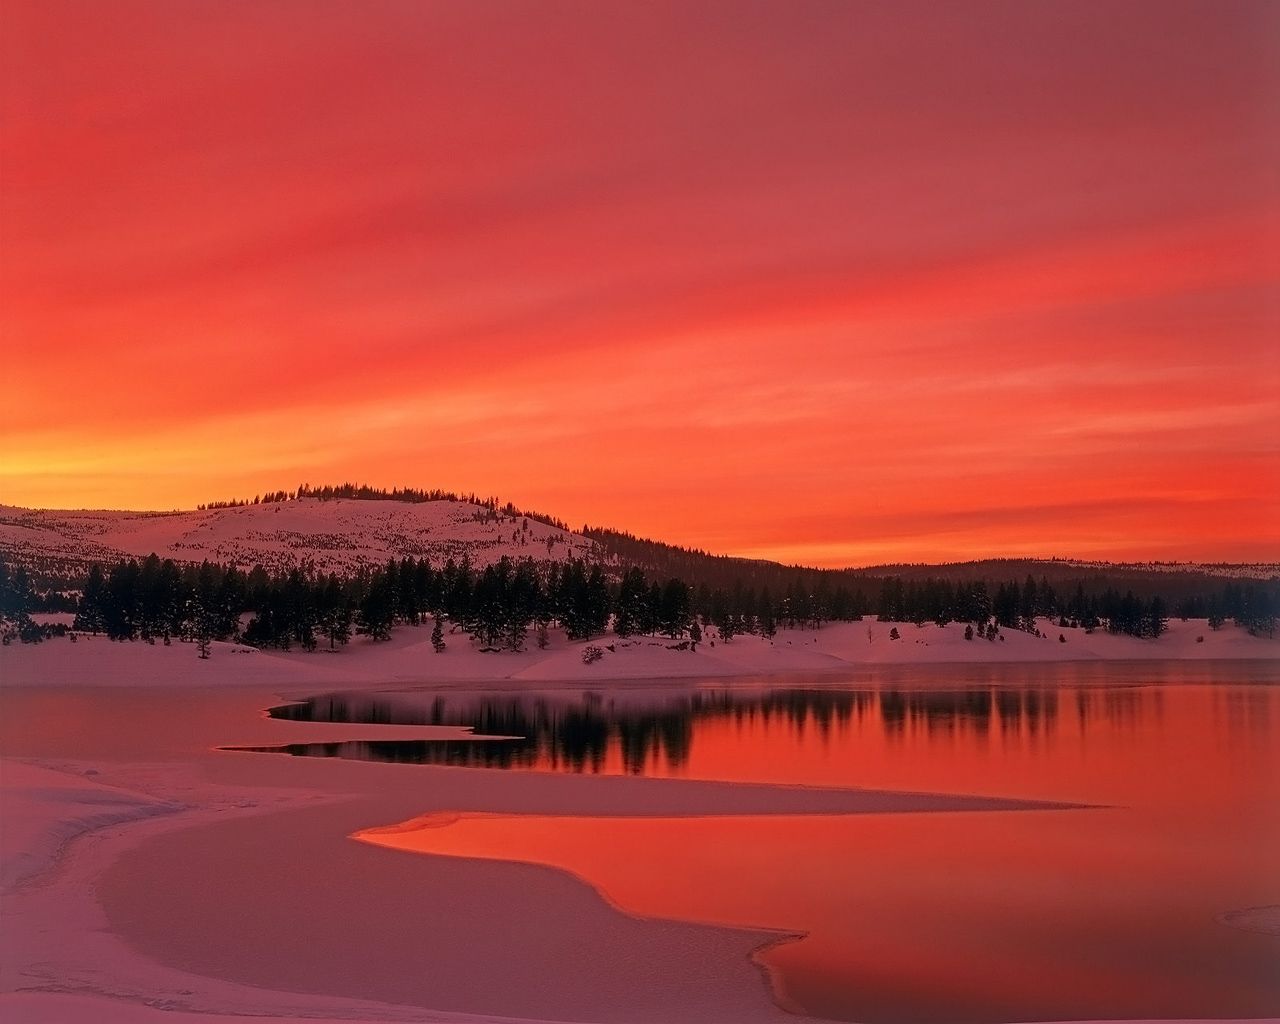 Nichole Toner On Intense Sunset Pictures Winter